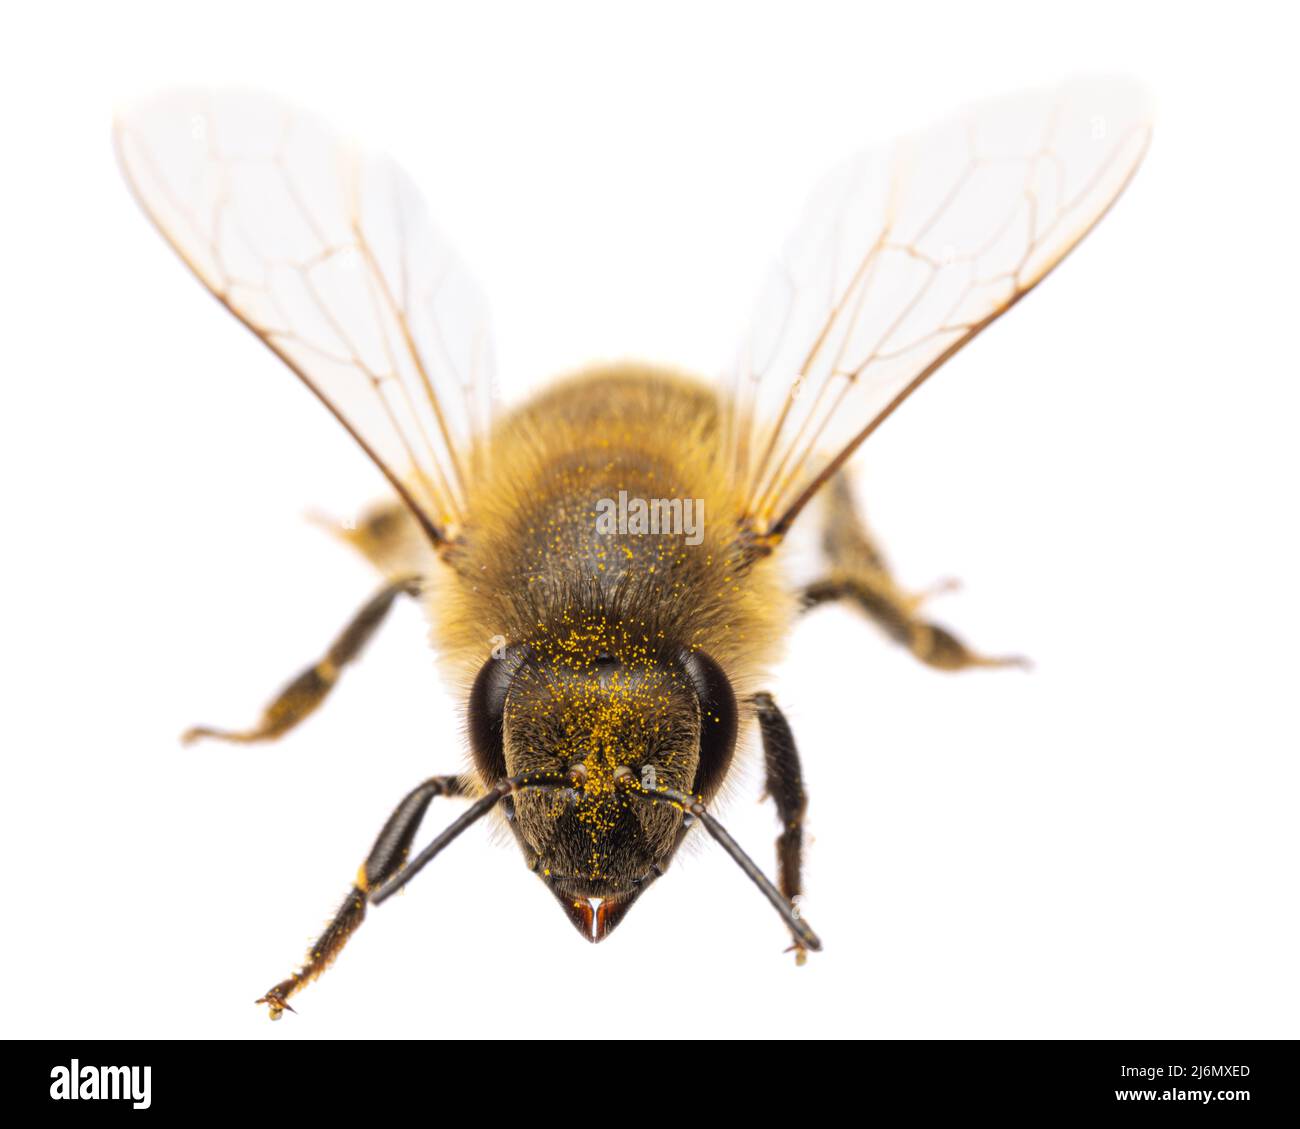 insects of europe - bees: front view of western honey bee or European honey bee ( Apis mellifera) isolated on white background with wings spreaded Stock Photo